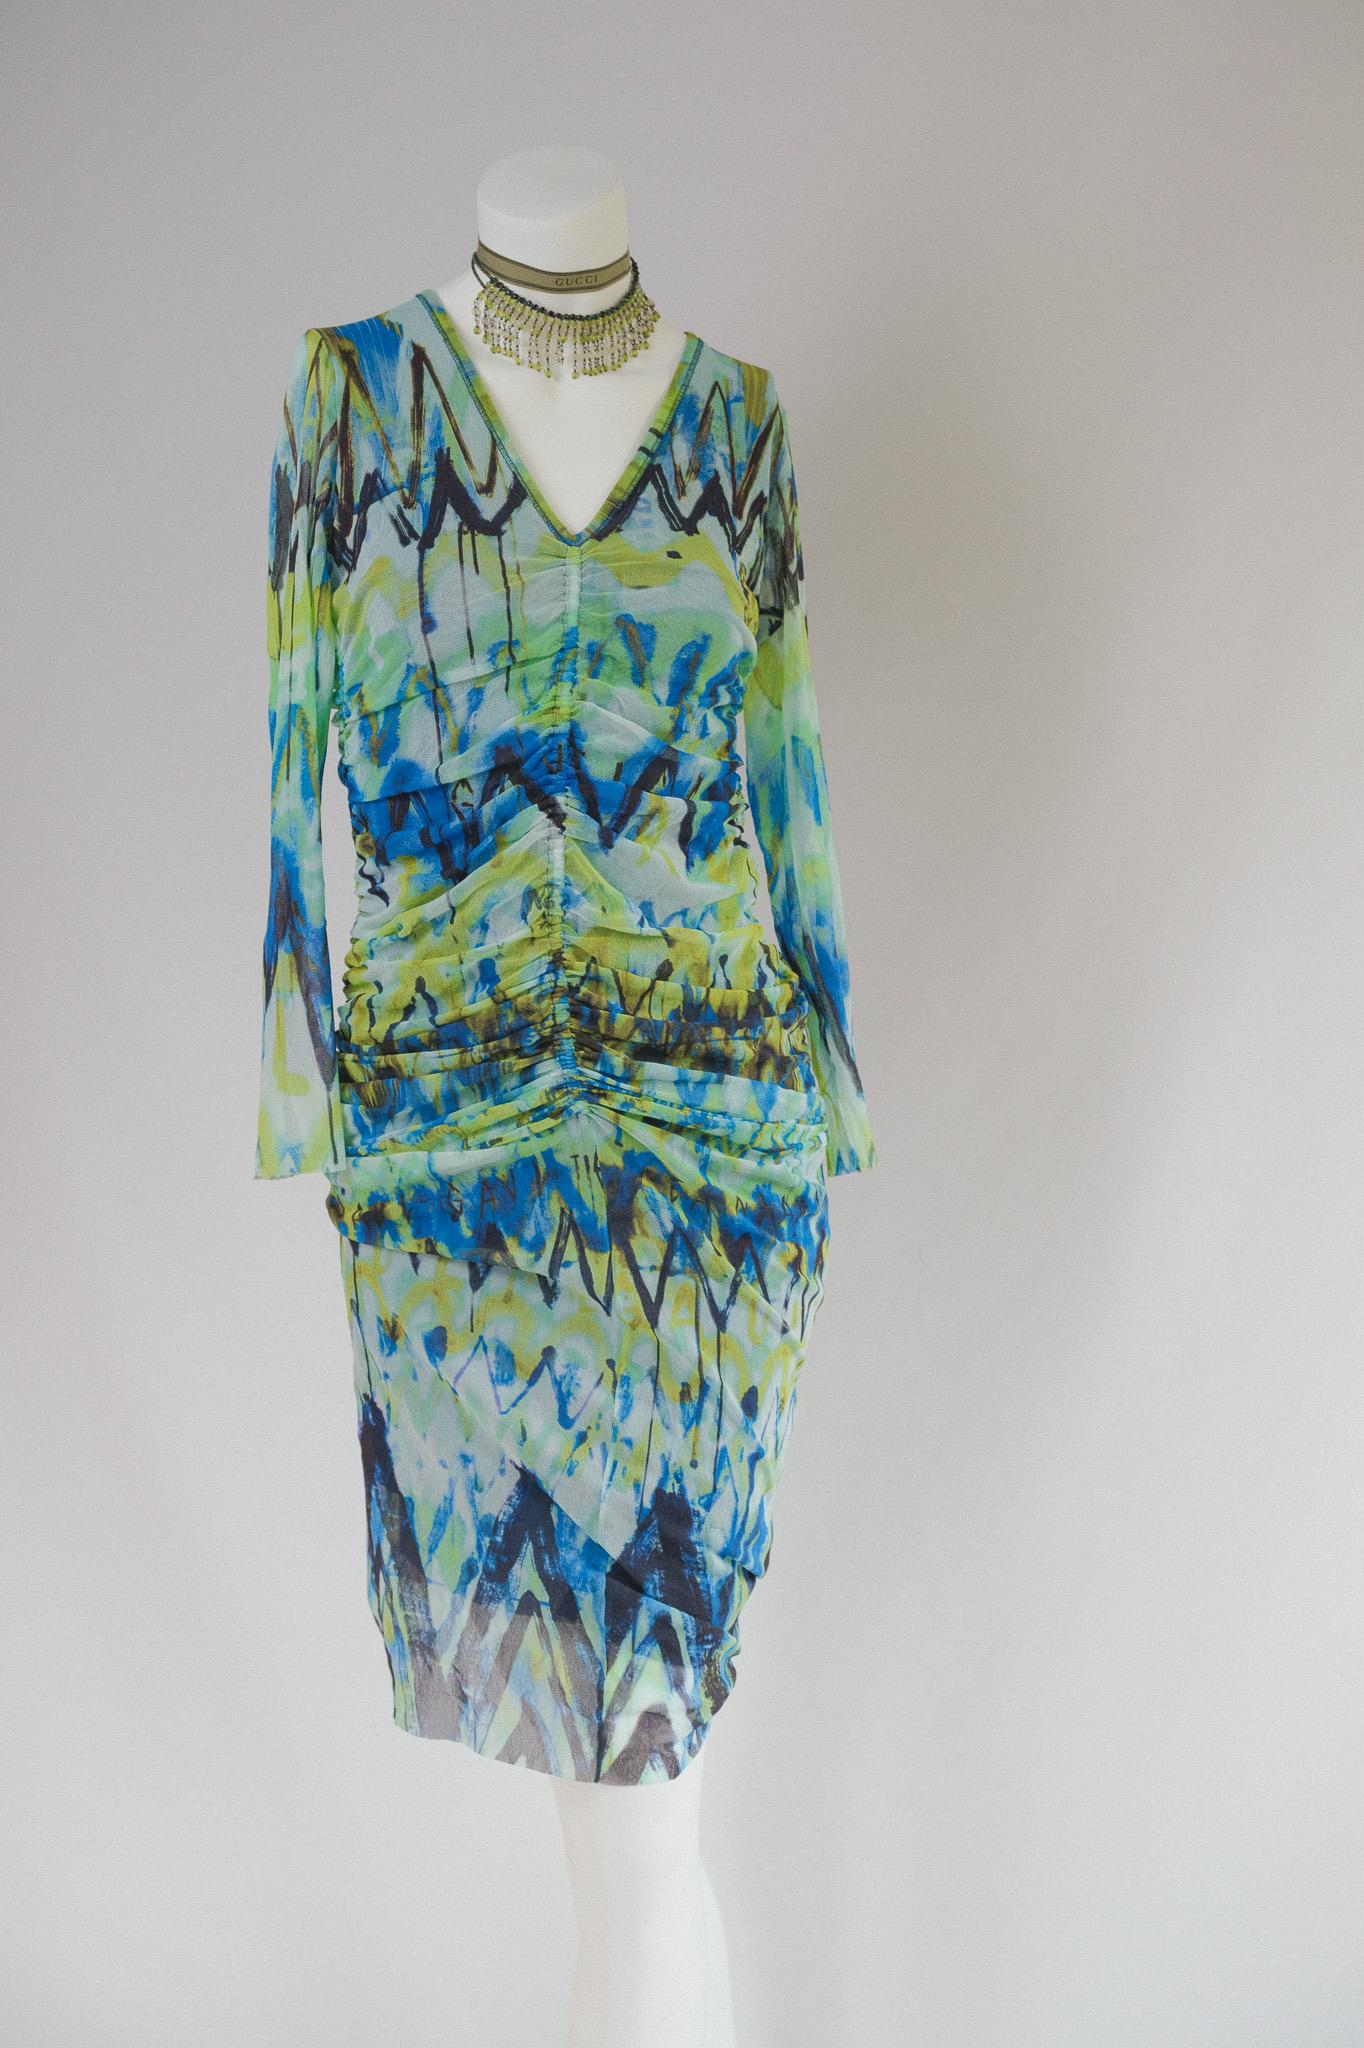 Phenomenal Jean Paul Gaultier 90s Micro Mesh Dress 
Acid Lime Green Zig Zag spray paint vibes fitted ruched midi finish

ICONIC
perfect for any occasion. 
Stand out from any crowd. 

tag size XL but Would fit a lot of bodies as has lots of fit and